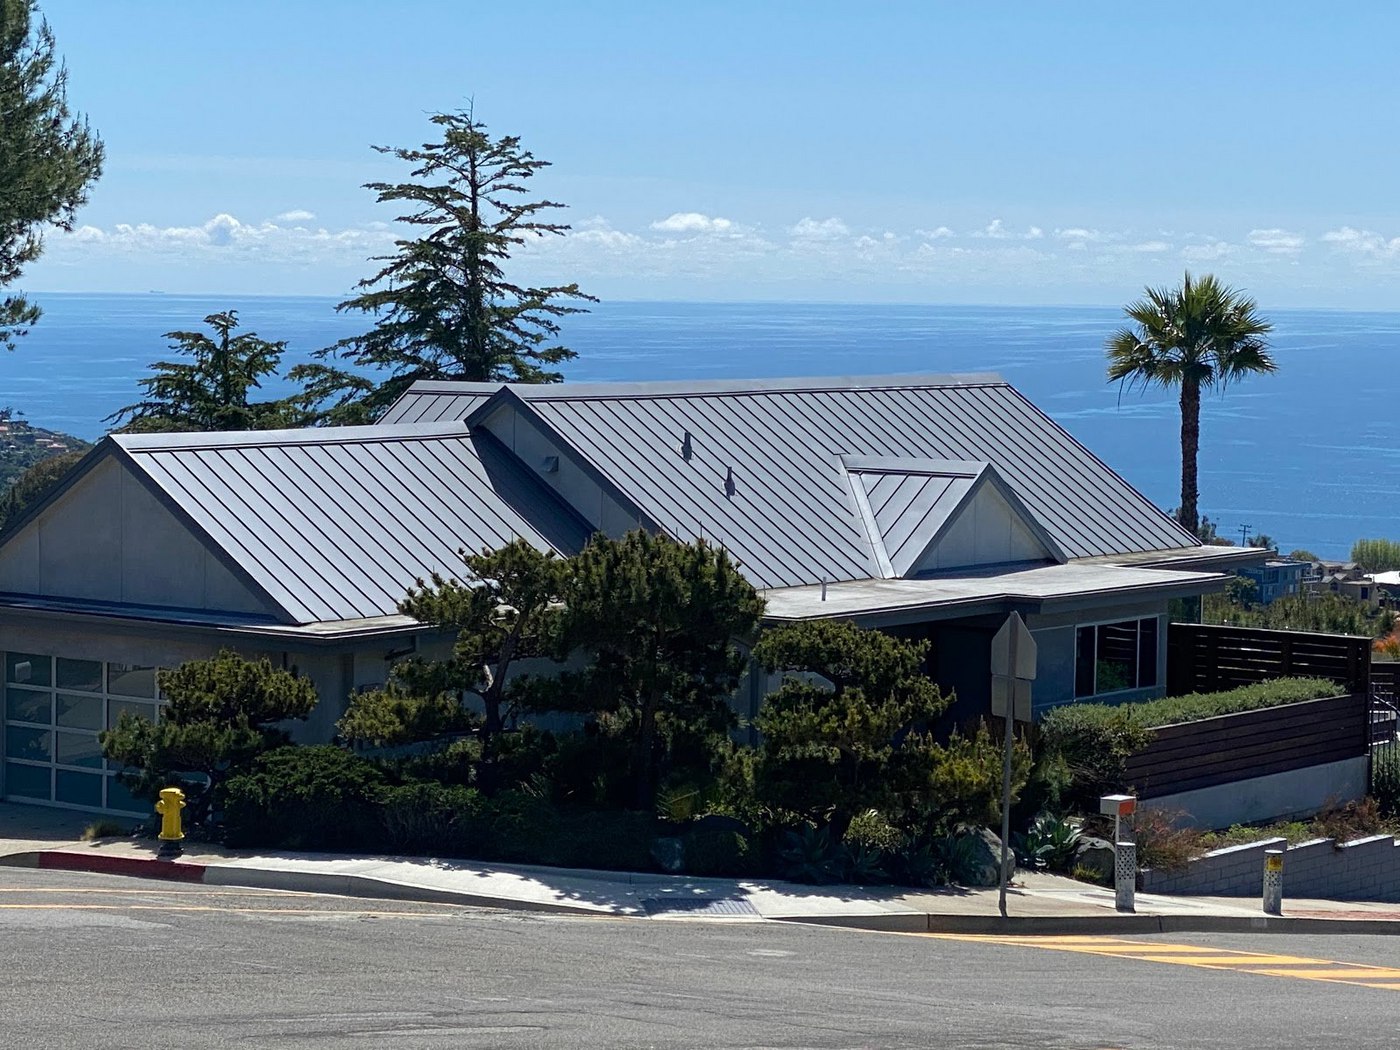 Metal Roofing In Coastal Areas: Best Materials To Use Near The Ocean